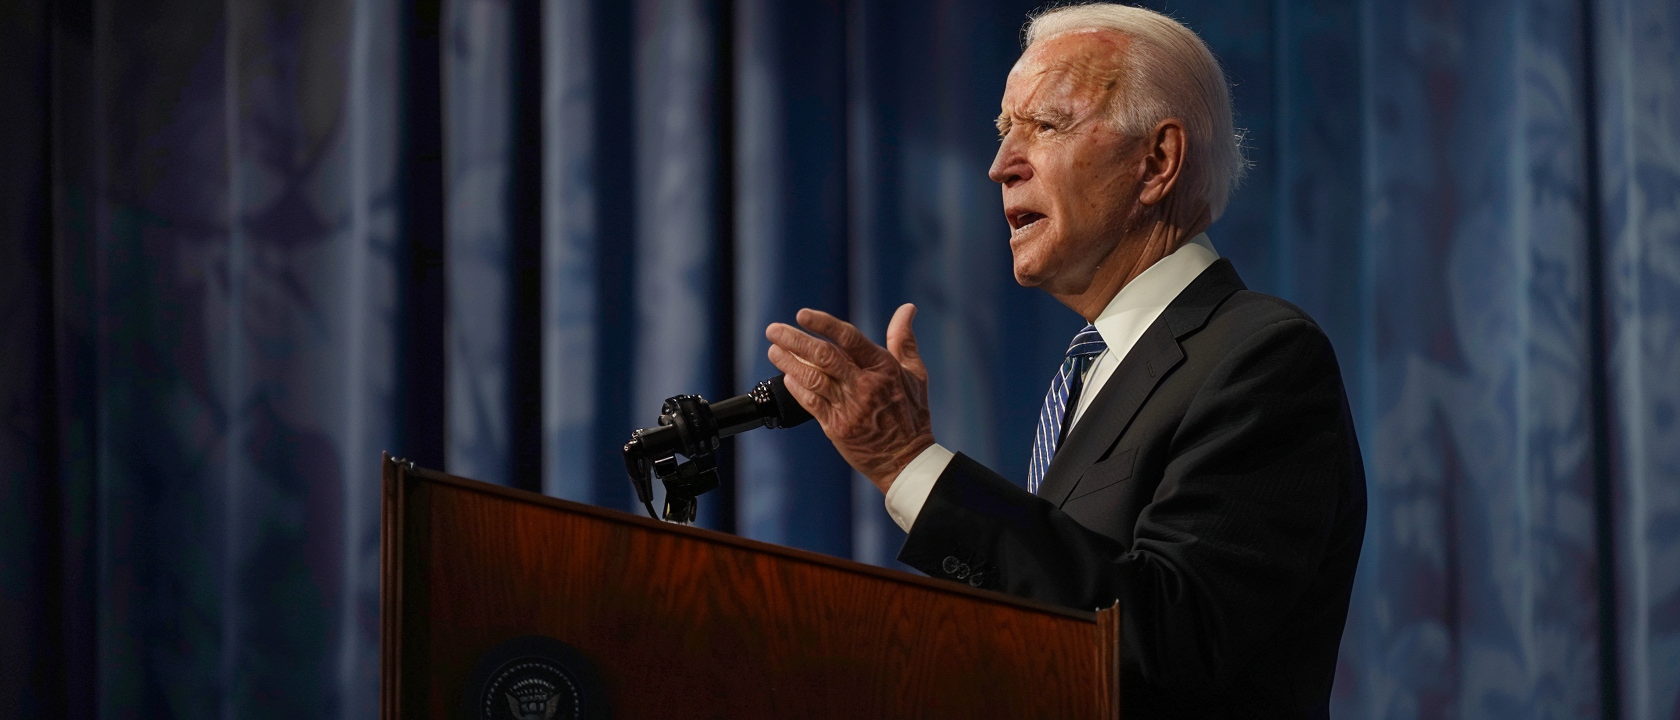 Biden's Handling of the Economy Criticized as Voters Feel the Pinch of Inflation